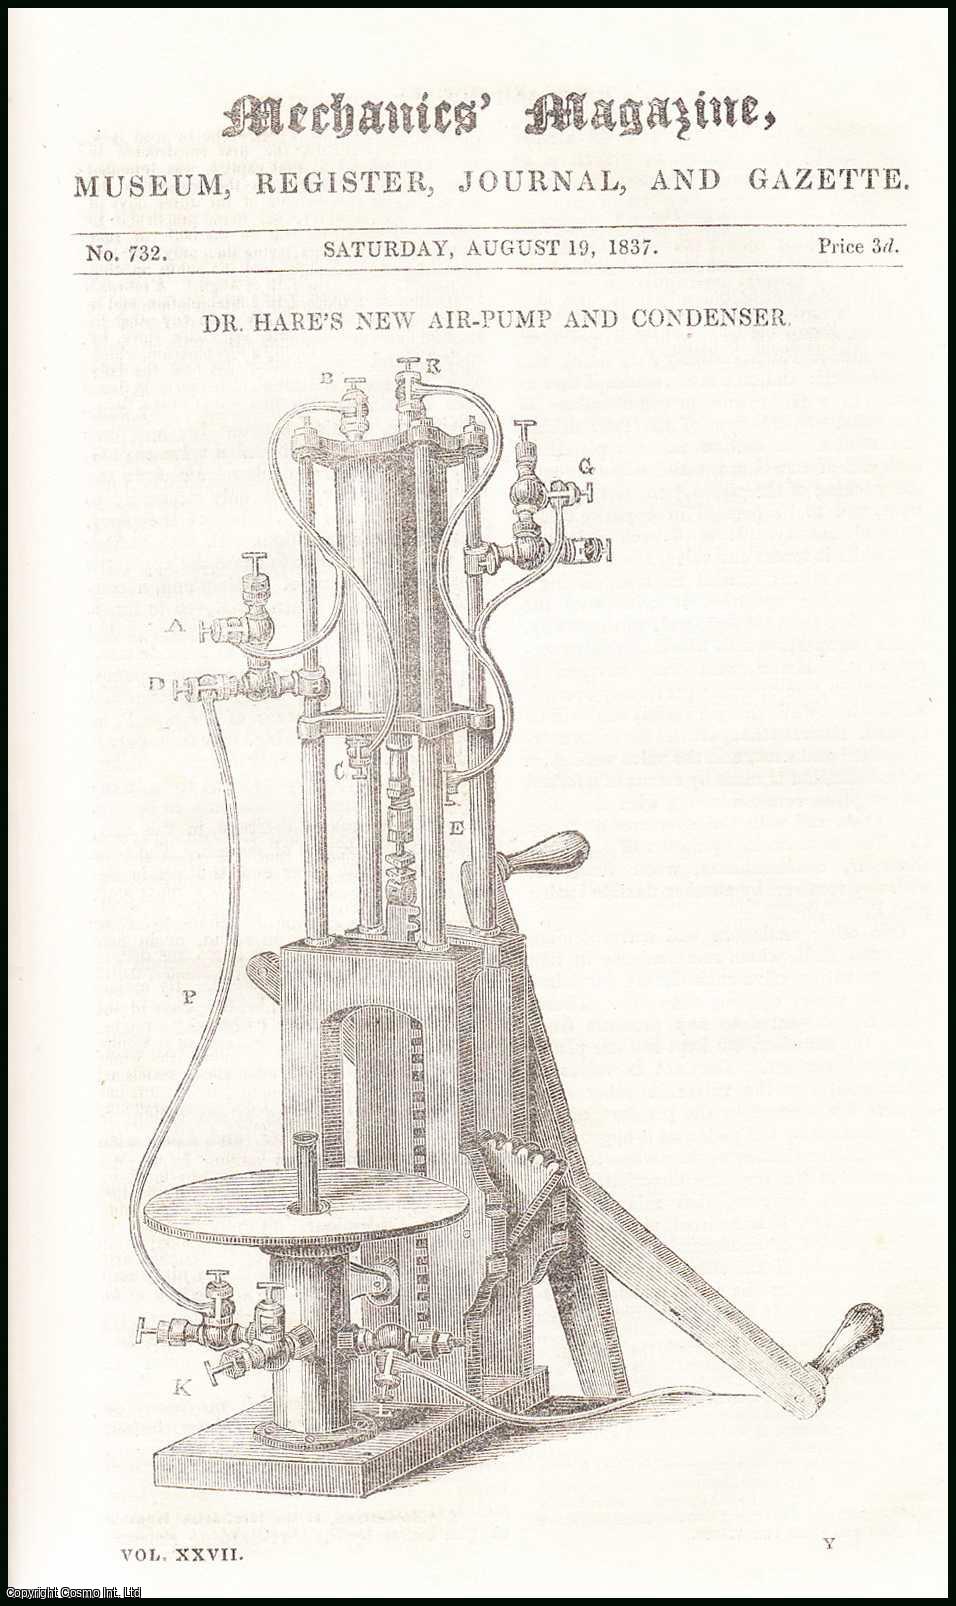 MECHANICS MAGAZINE - Dr. Hare's New Air-Pump & Condenser; the Duty Performed by the Cornwall Steam Engines; the Manufacture of Whim-Ropes from Iron Wire, etc. Mechanics Magazine, Museum, Register, Journal and Gazette. Issue No. 732. A complete rare weekly issue of the Mechanics' Magazine, 1837.